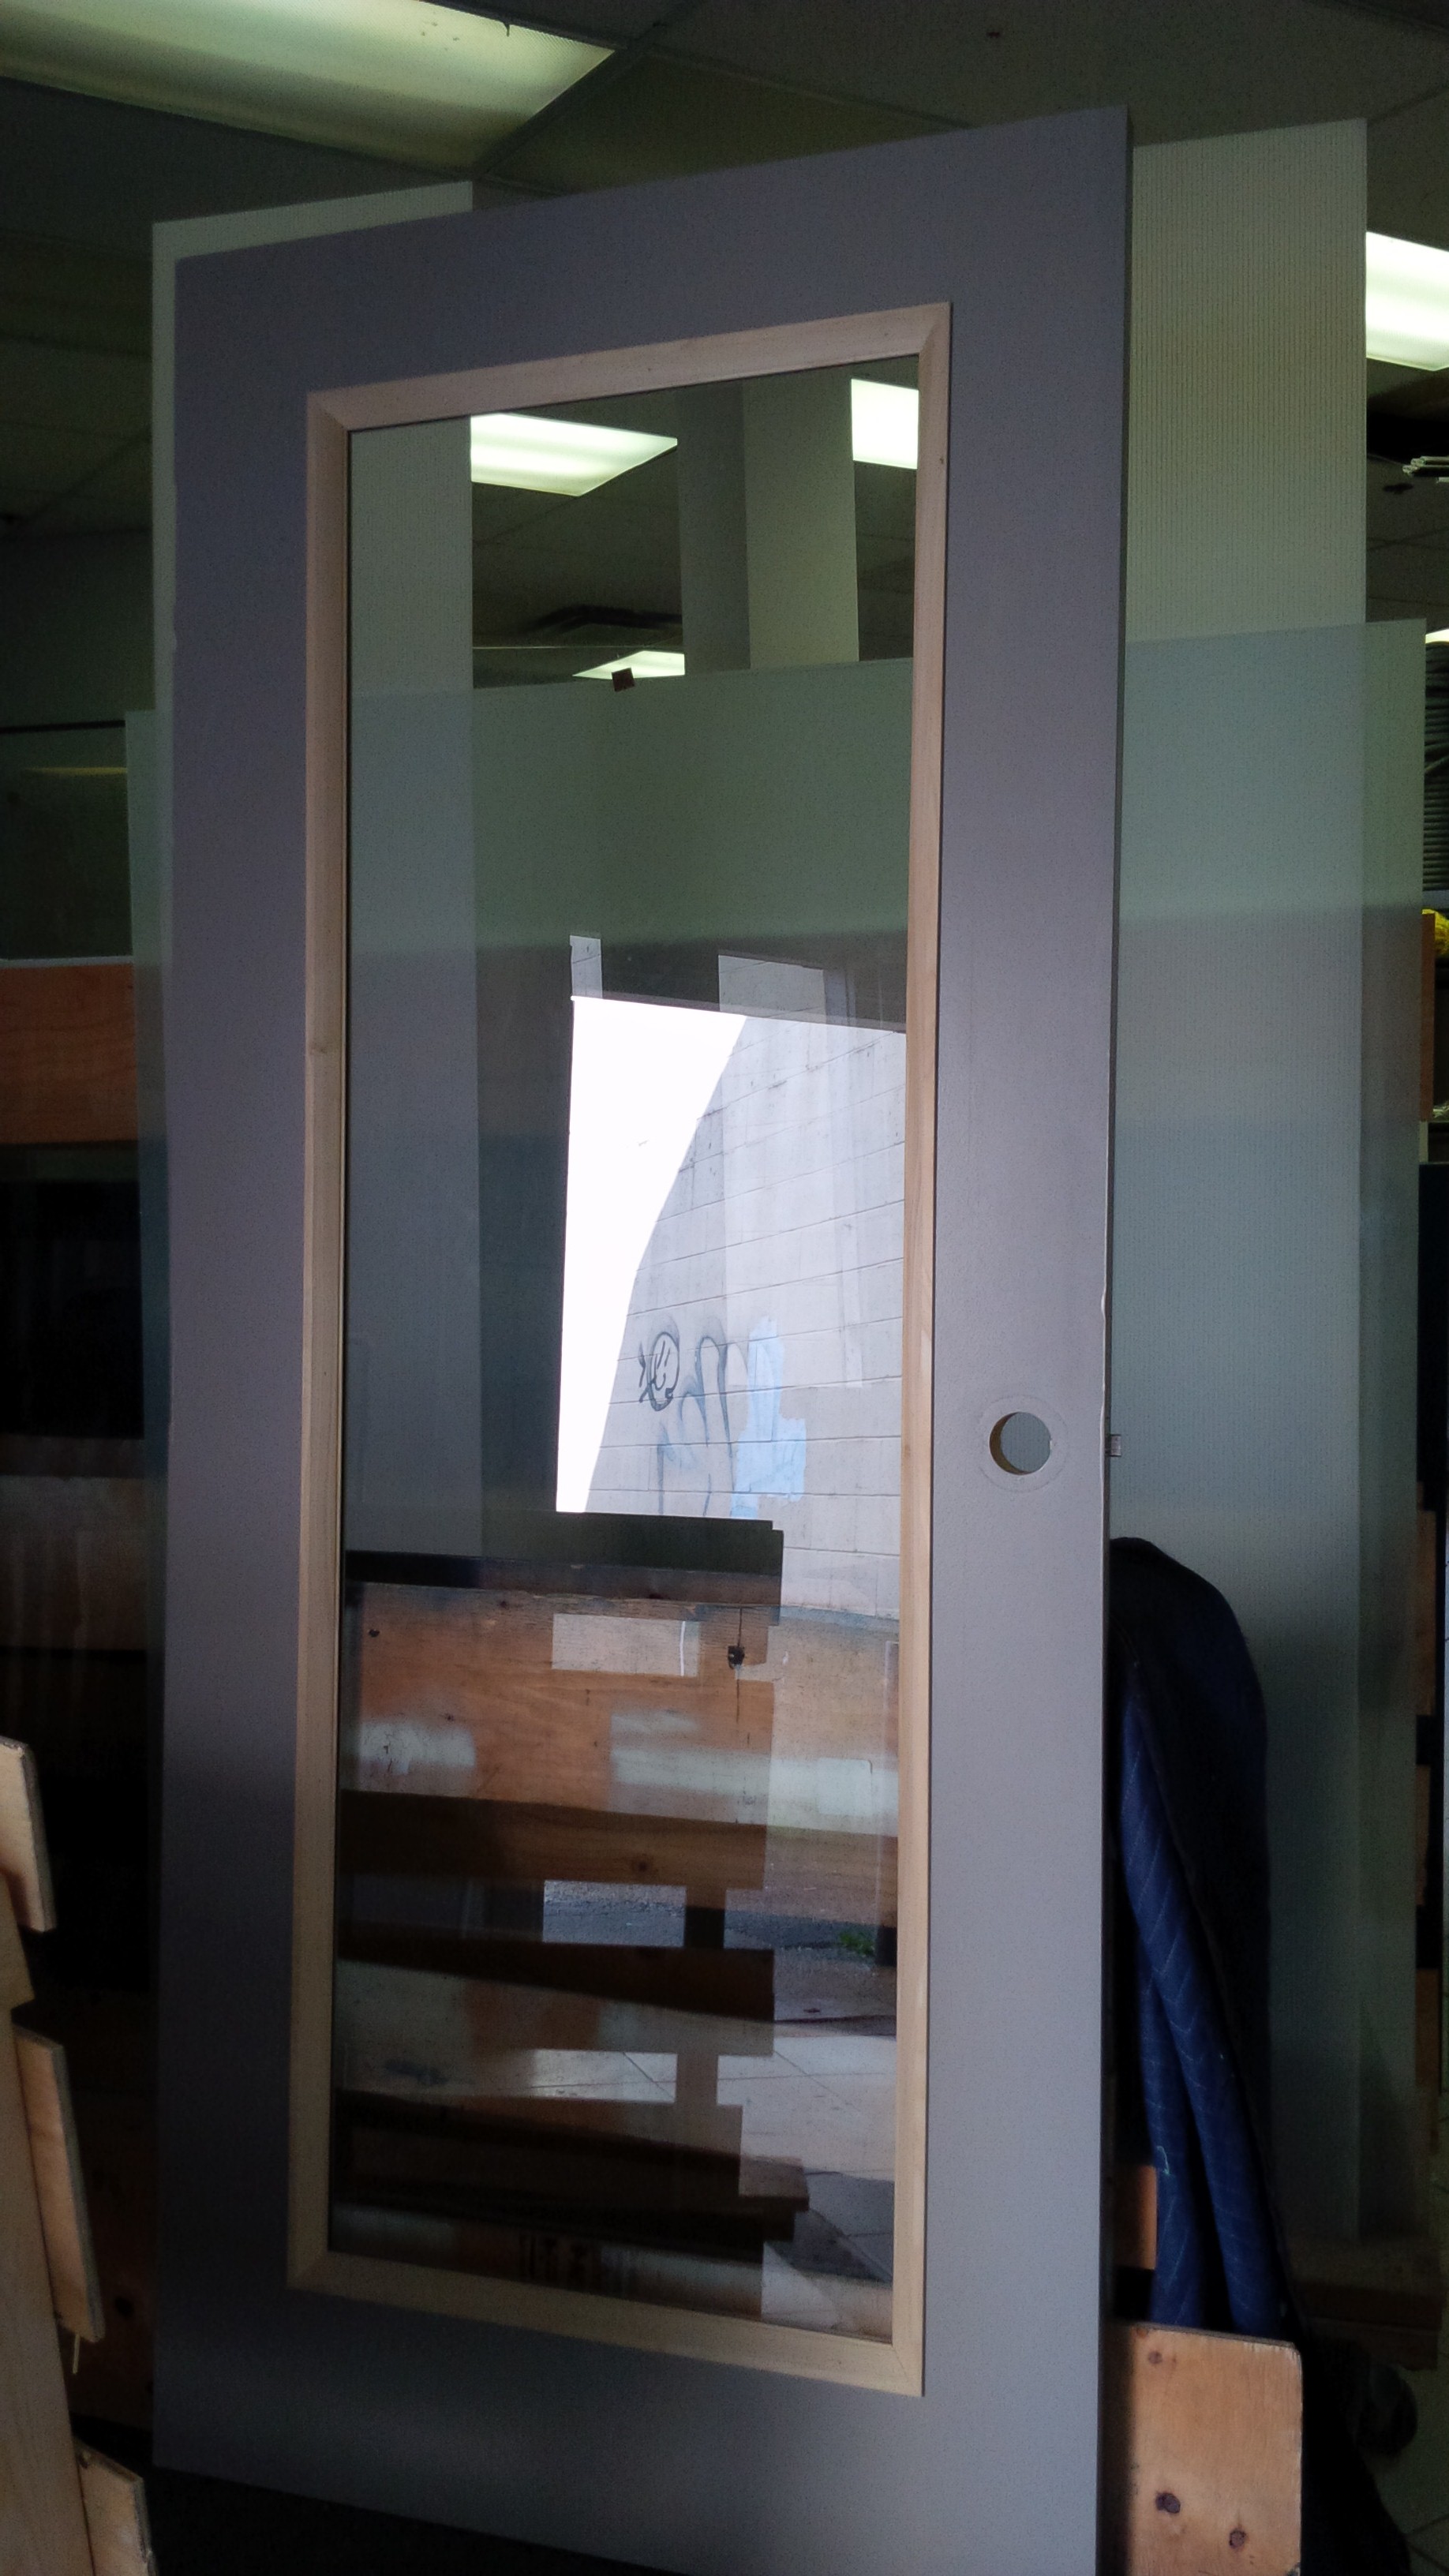 Cut open wood entry door and installed clear glass into it.